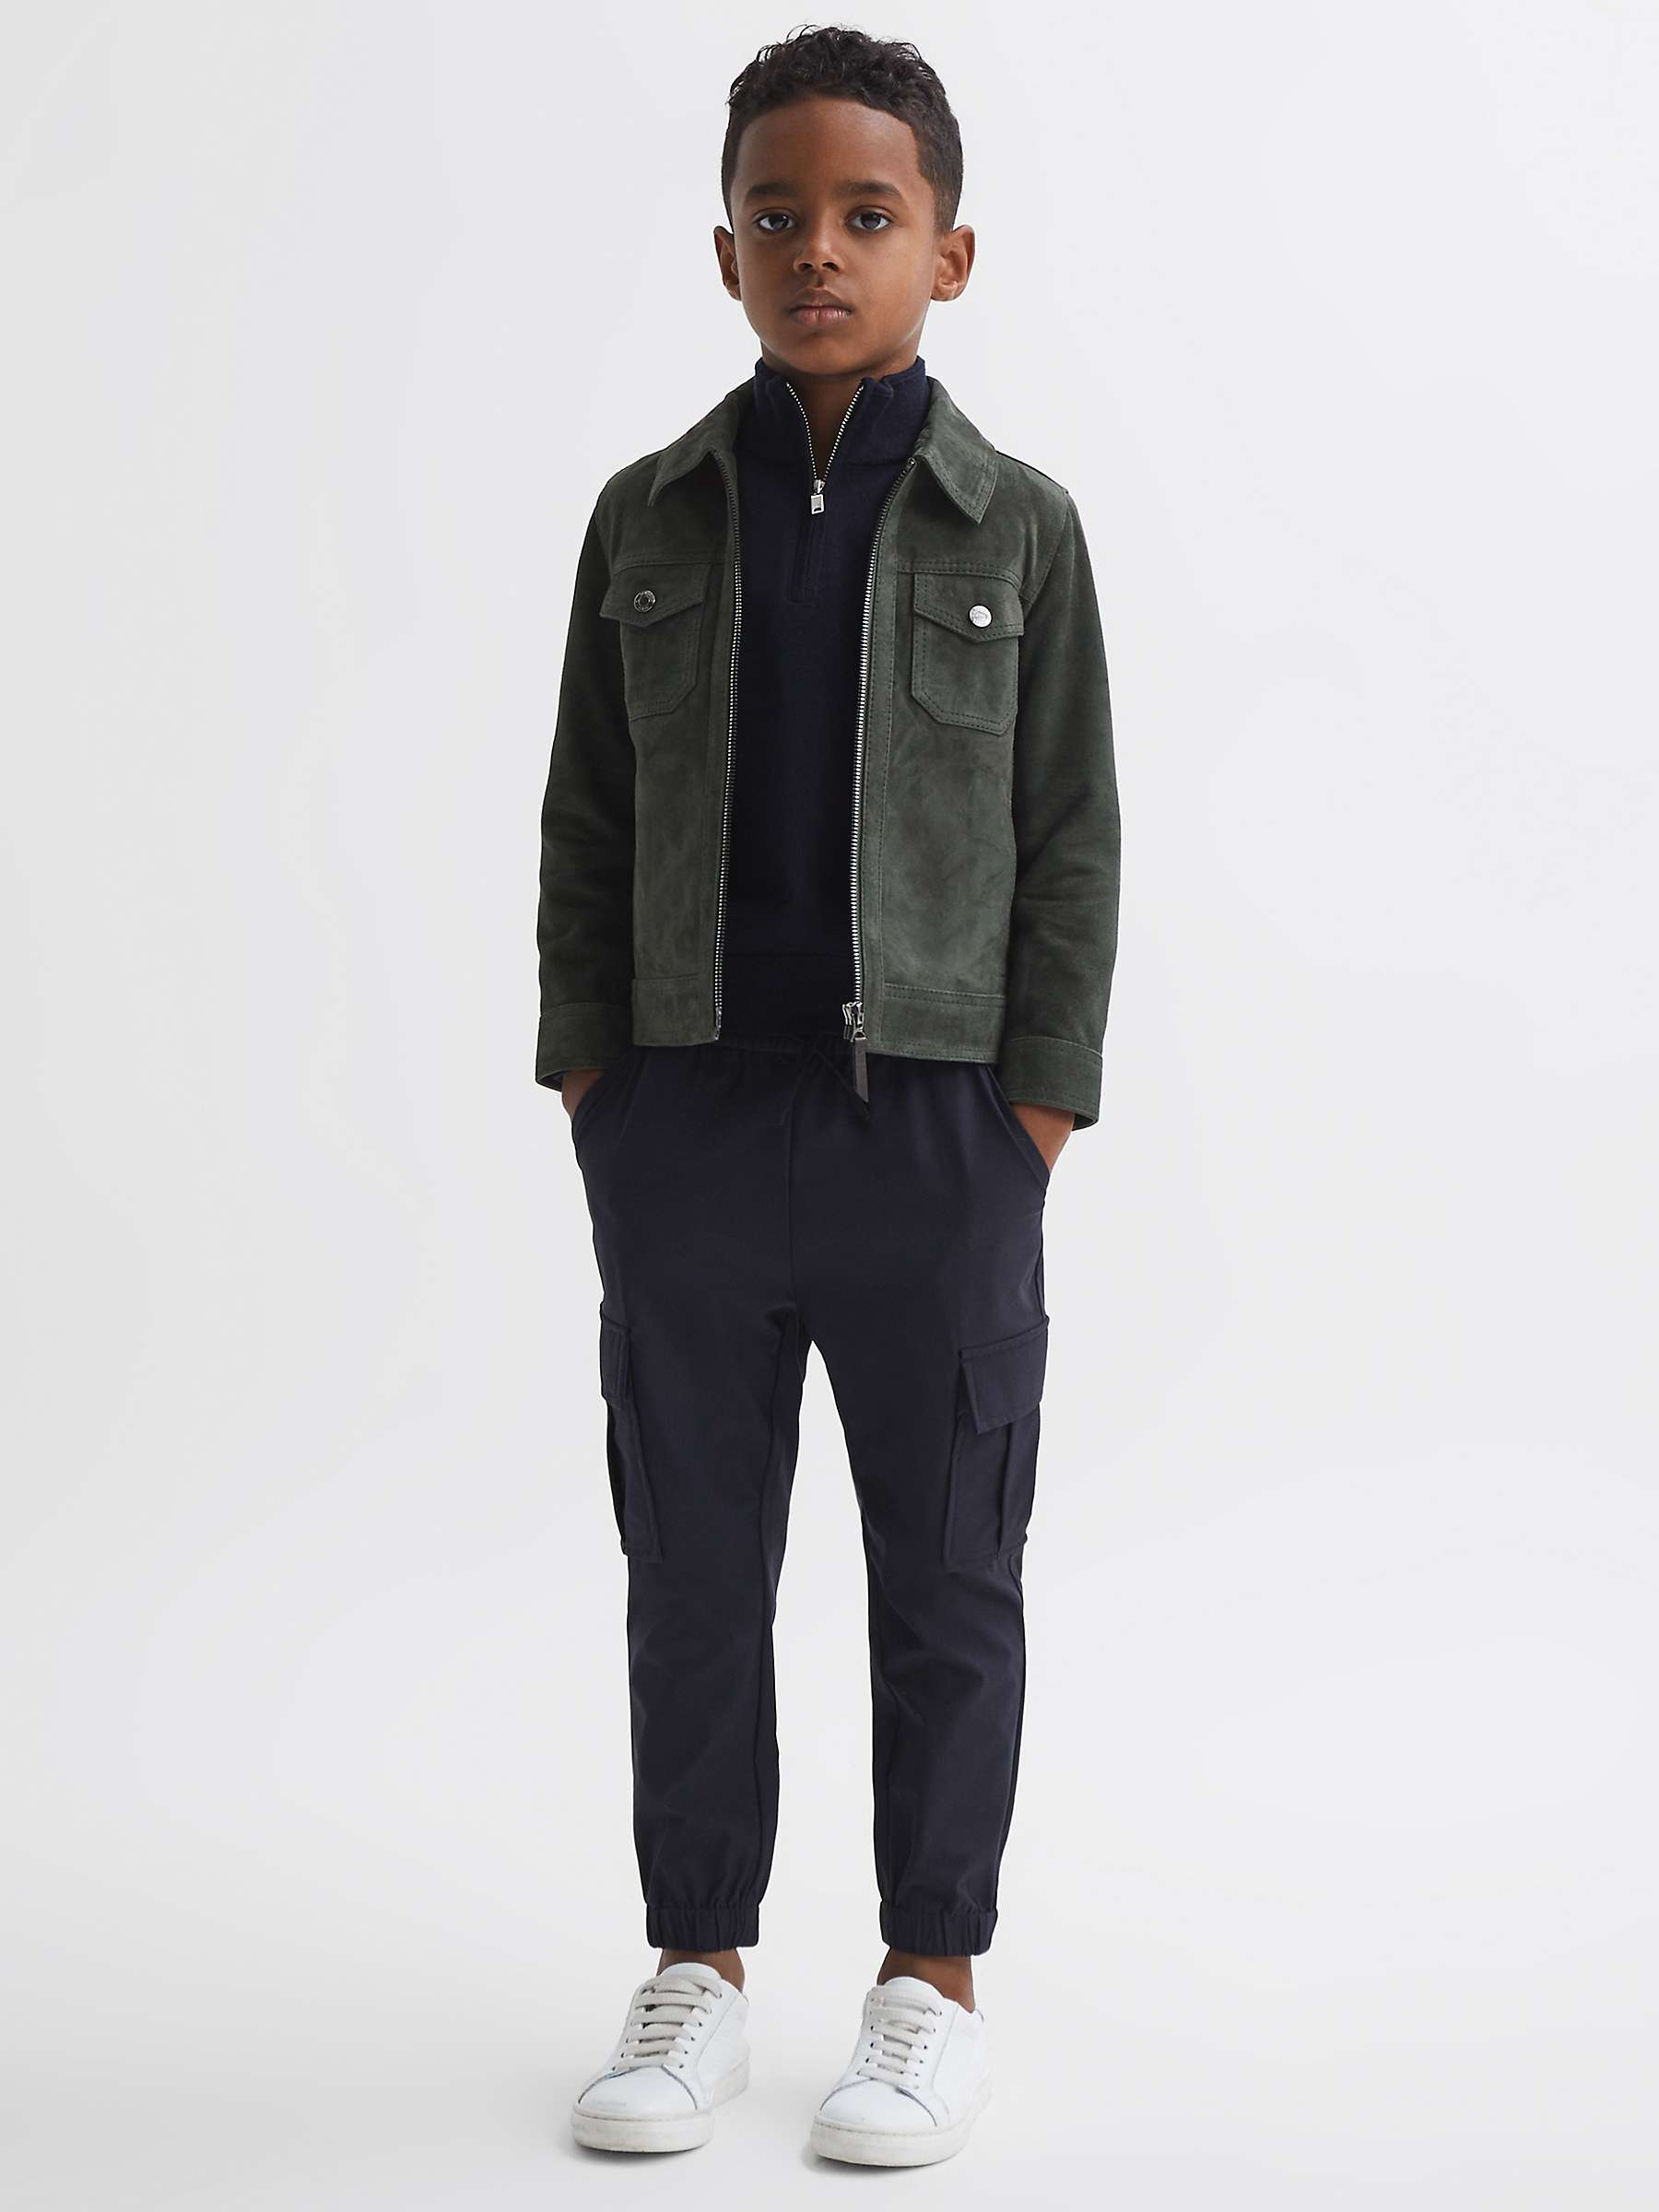 Buy Reiss Kids' Pike Suede Jacket, Forest Green Online at johnlewis.com